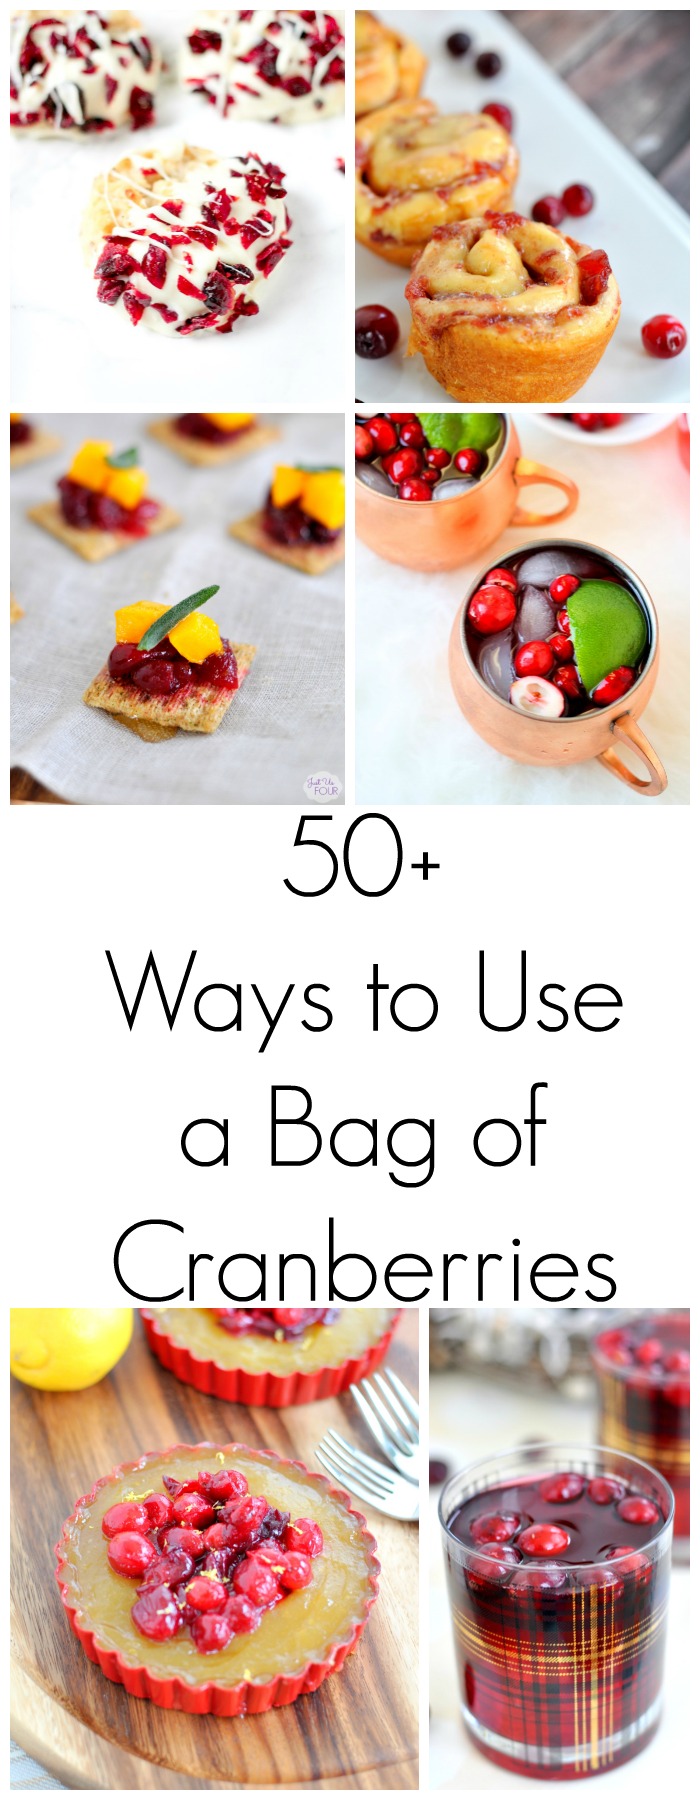 50+ Ways to Use a Bag of Cranberries